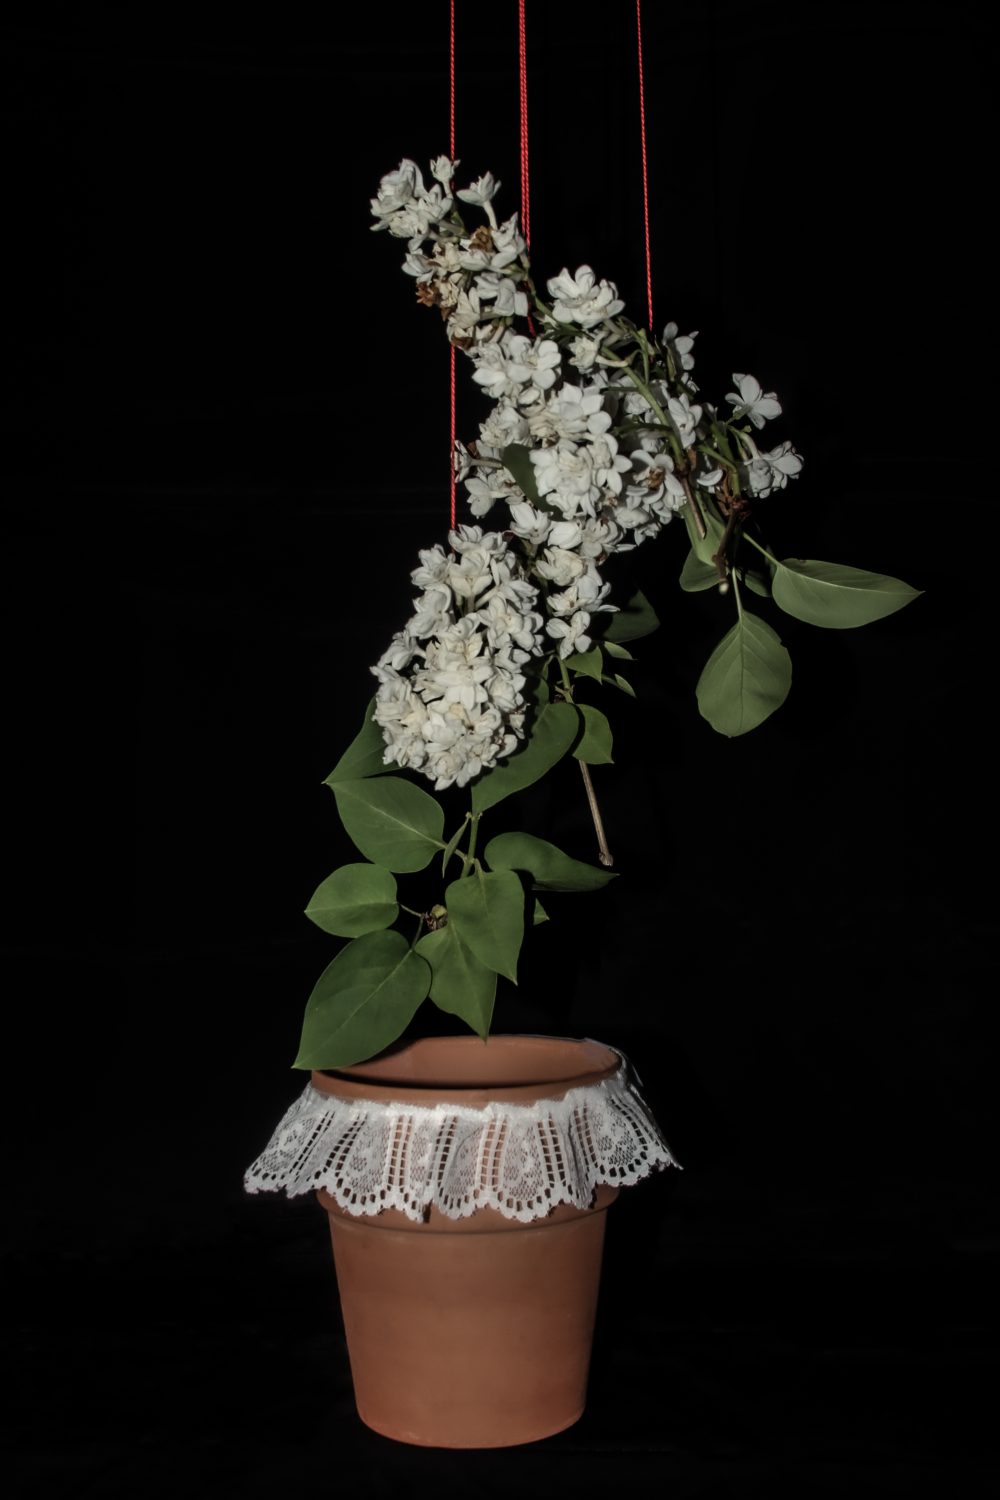 A pot and flowers floating in space, held up by bright red strings.